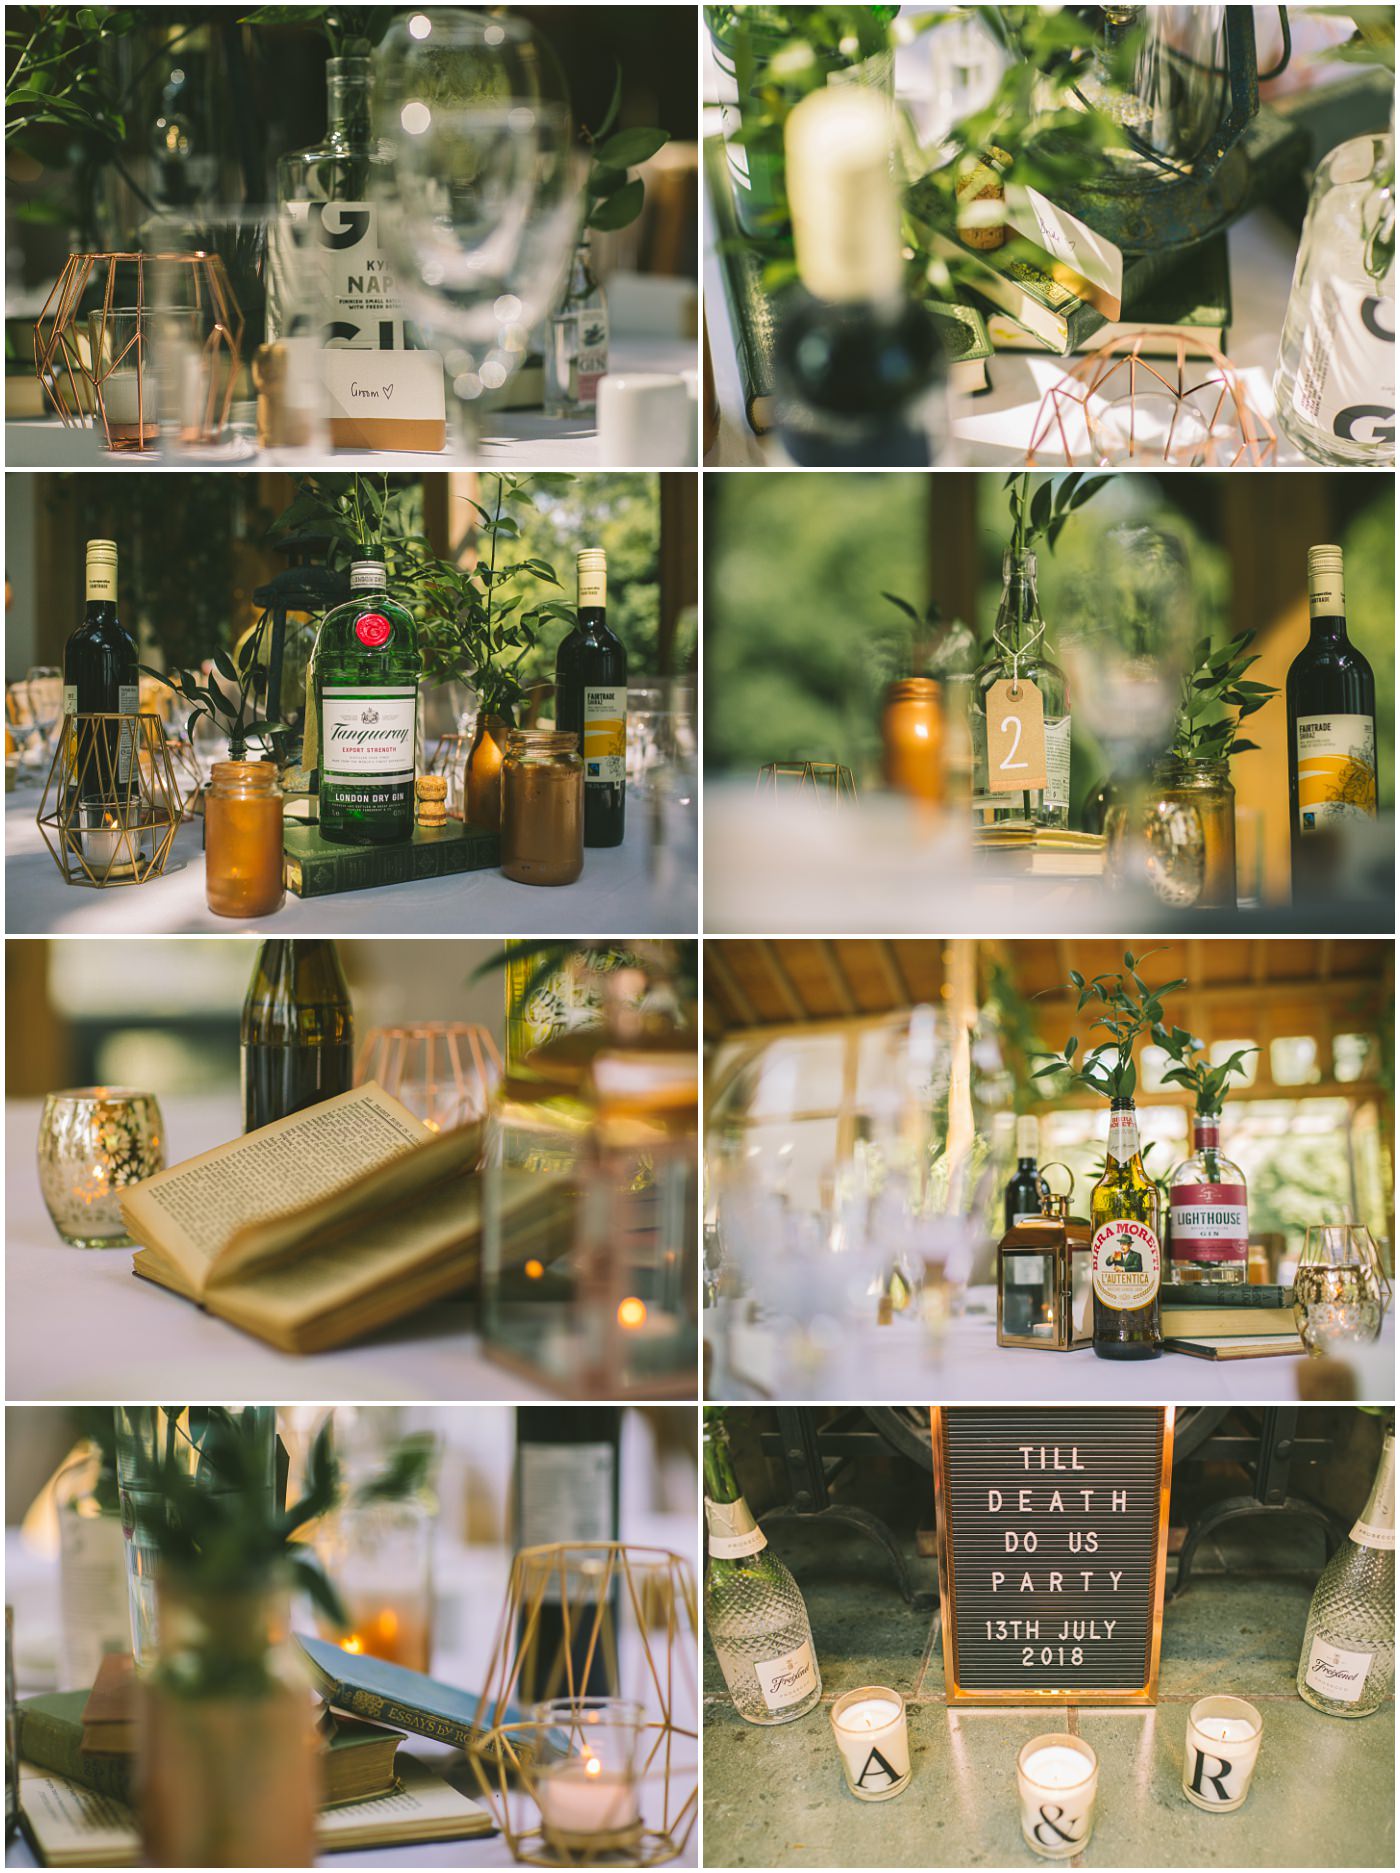 beautiful details and gin bottle centrepieces used in rustic DIY upcycled wedding